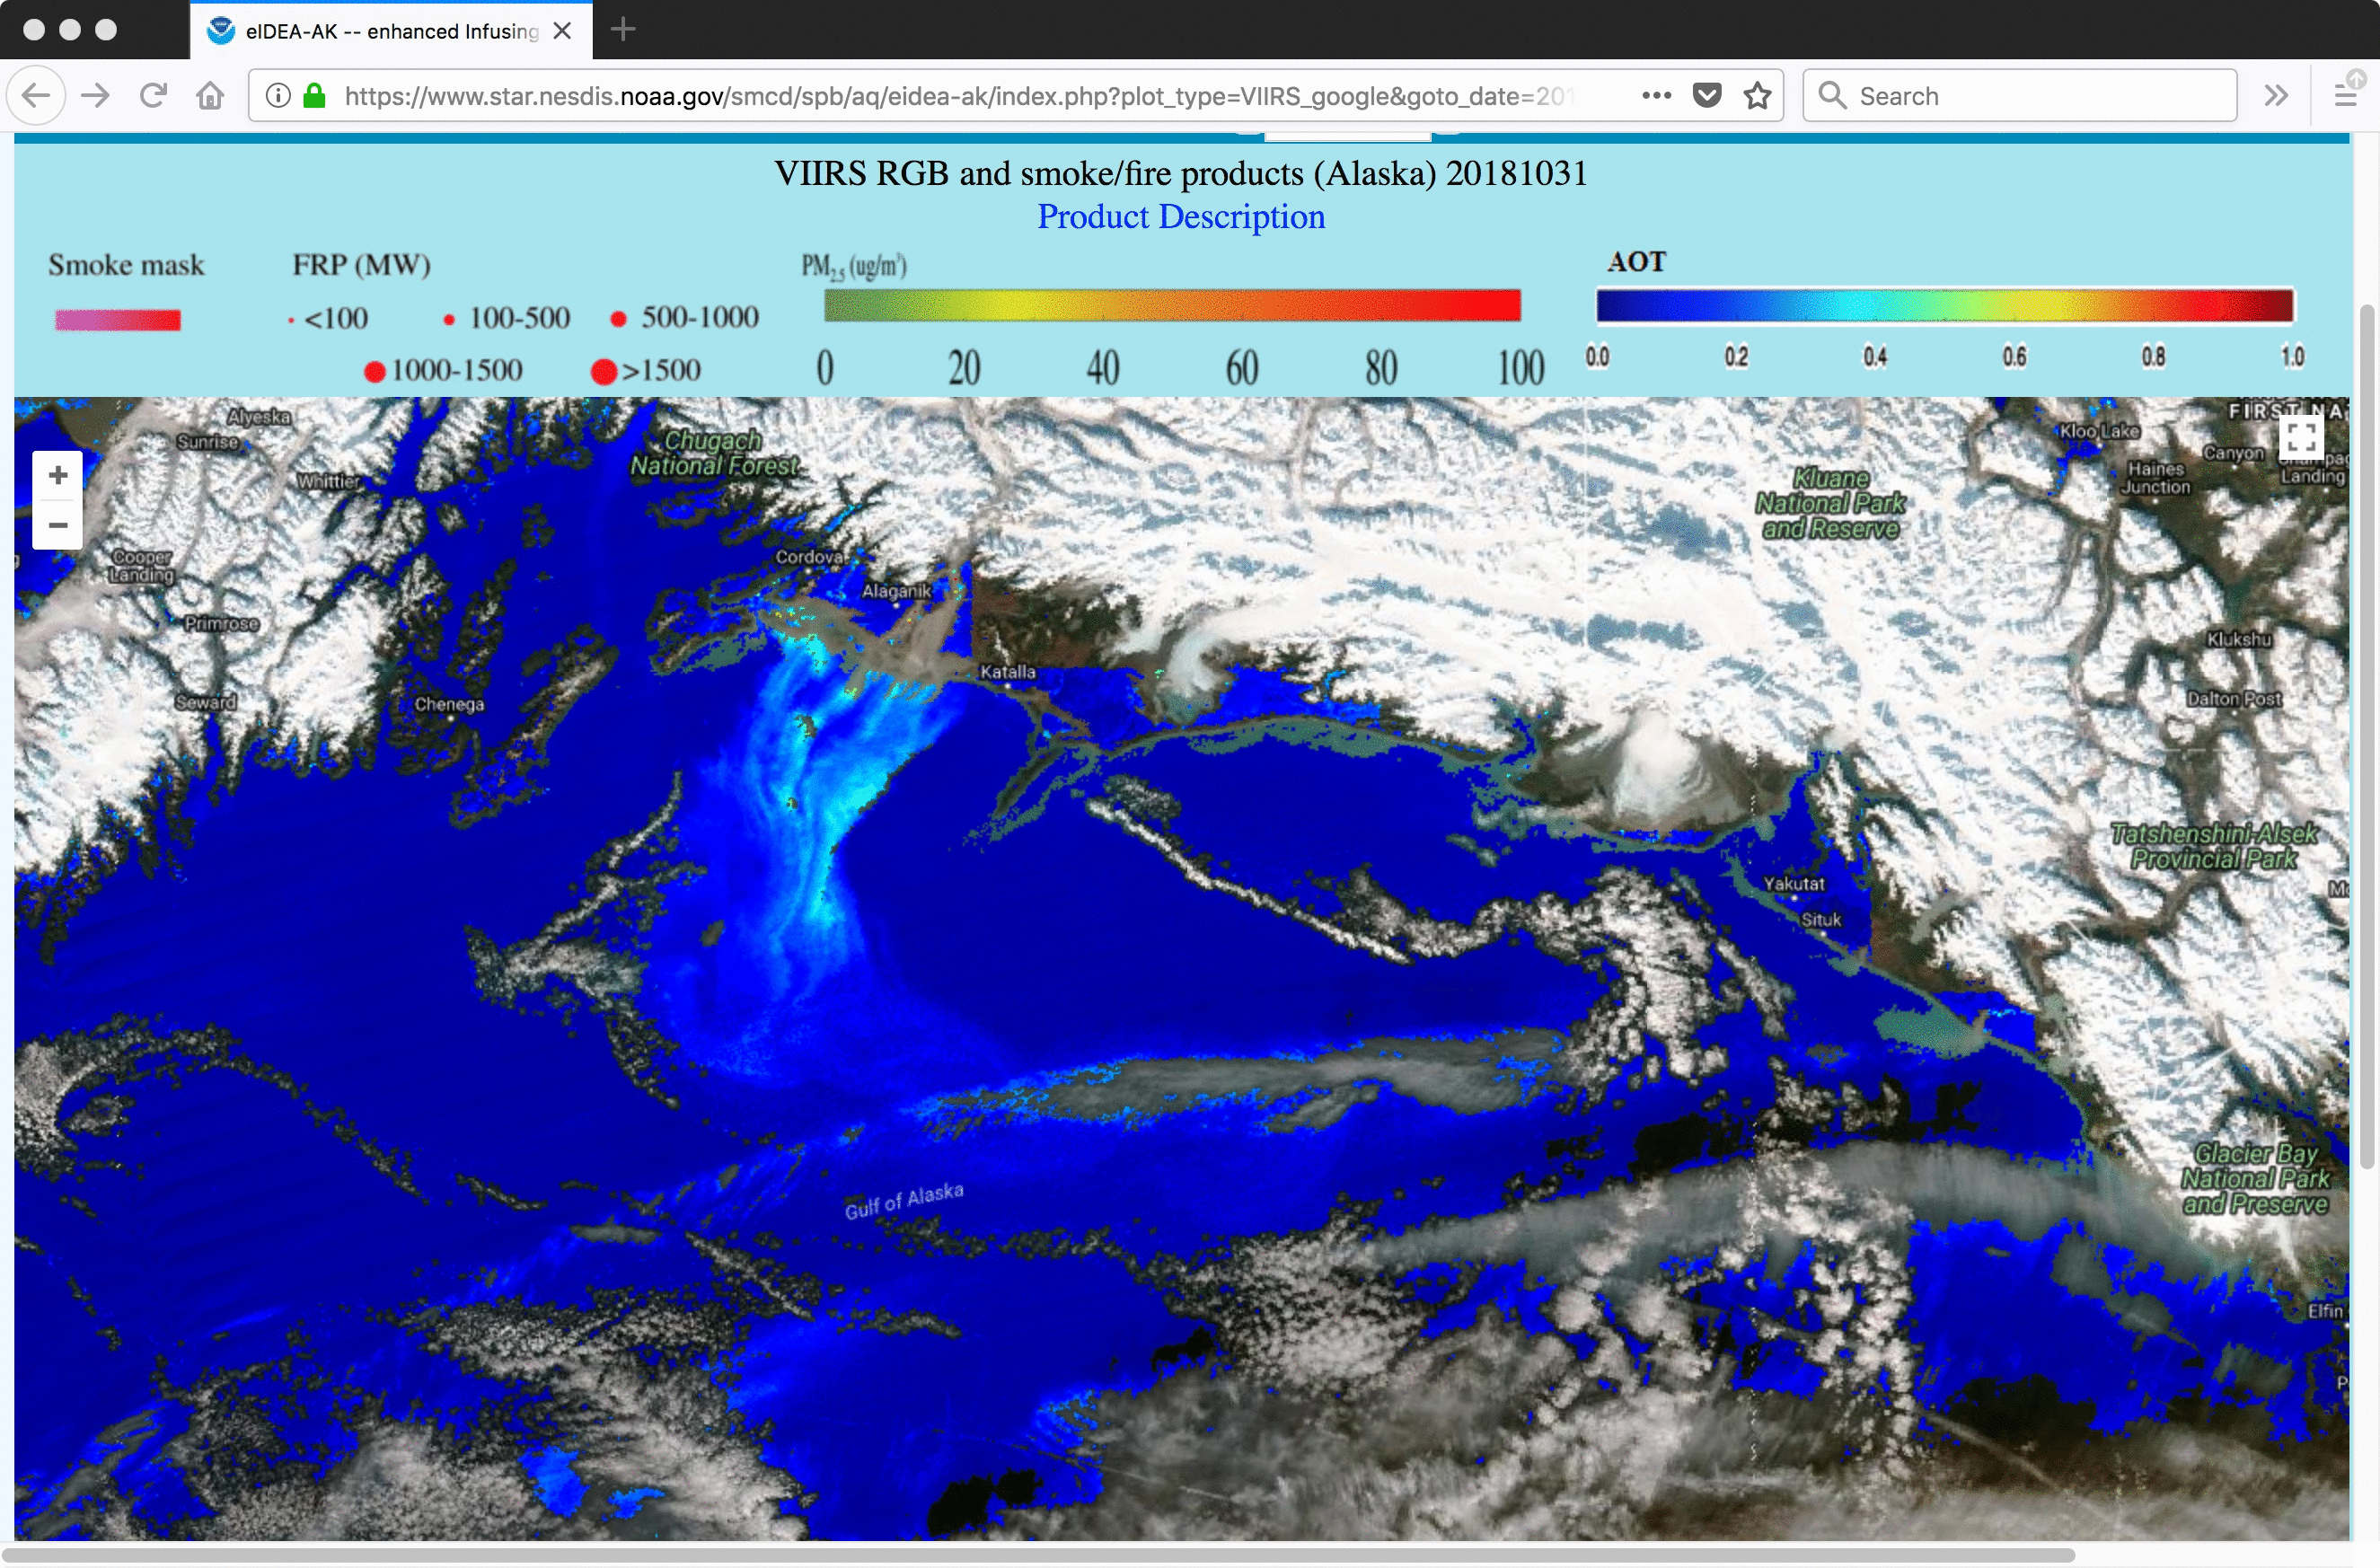 VIIRS Aerosol Optical Thickness product [click to enlarge]